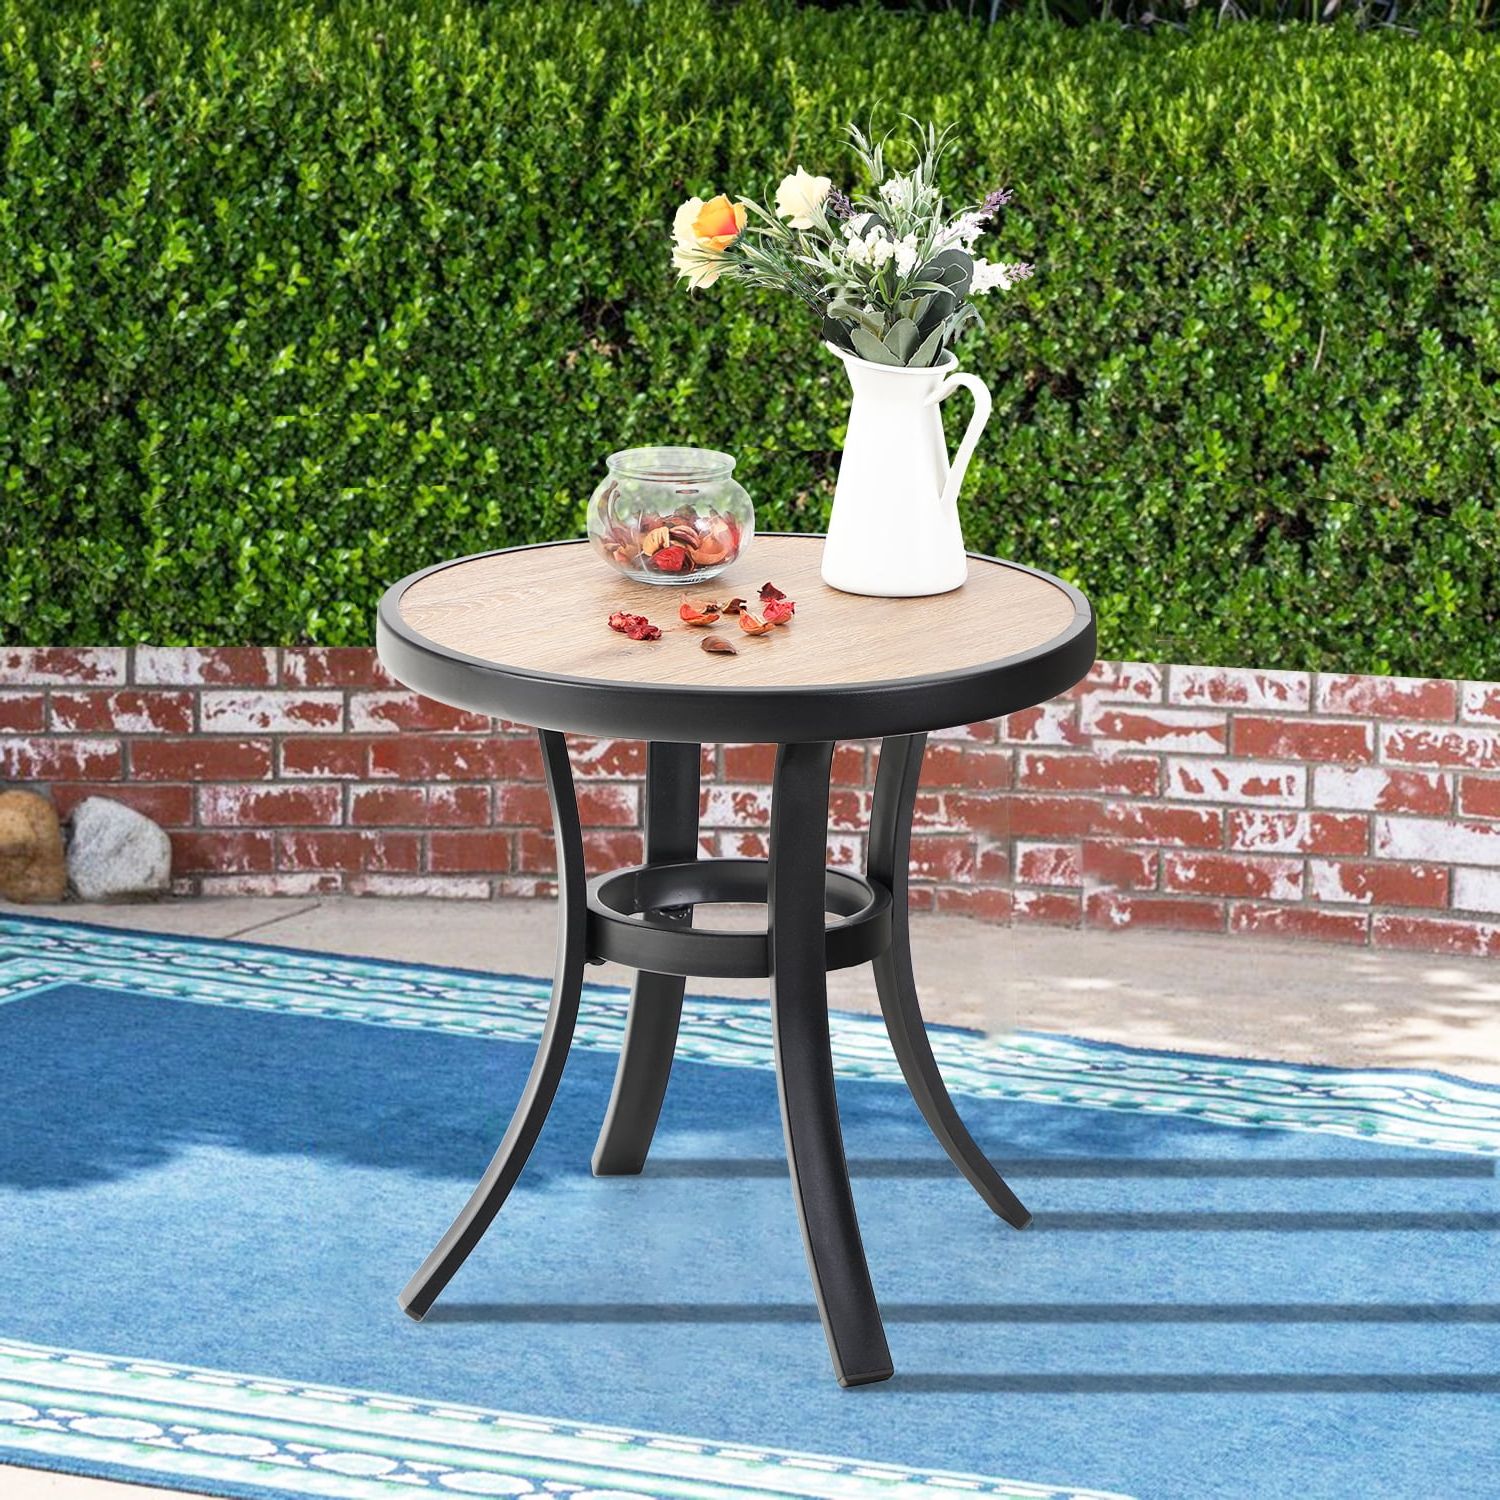 Mf Studio 19 Inches Bistro Side Table, Outdoor Coffee Table Wooden Like Pertaining To Outdoor Half Round Coffee Tables (View 8 of 20)